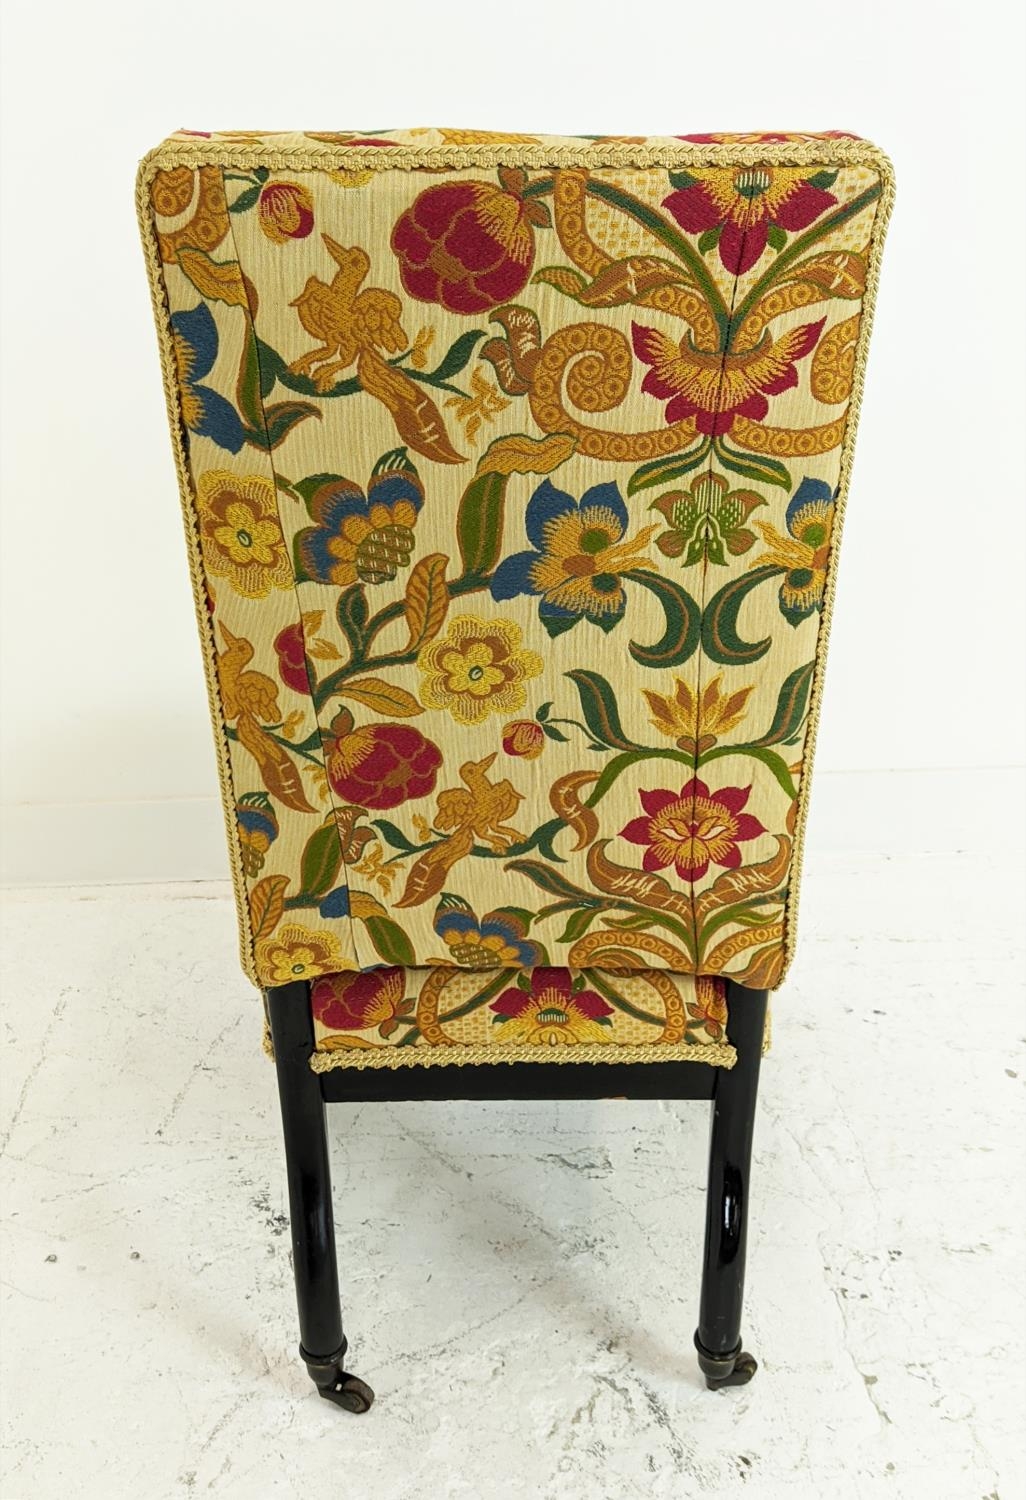 SLIPPER CHAIR, 19th century ebonised with William Morris patterned upholstery, 96cm H x 51cm W. - Image 13 of 18